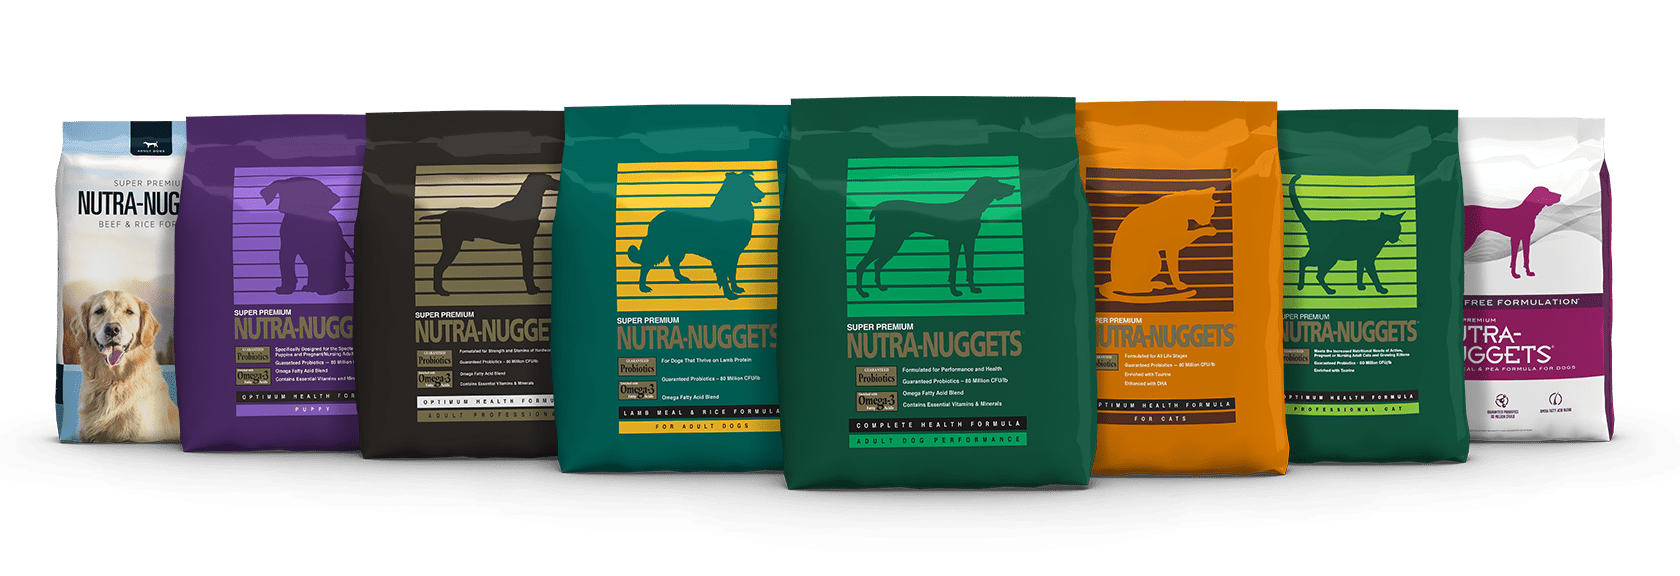 Nutra-Nuggets US Family of Products